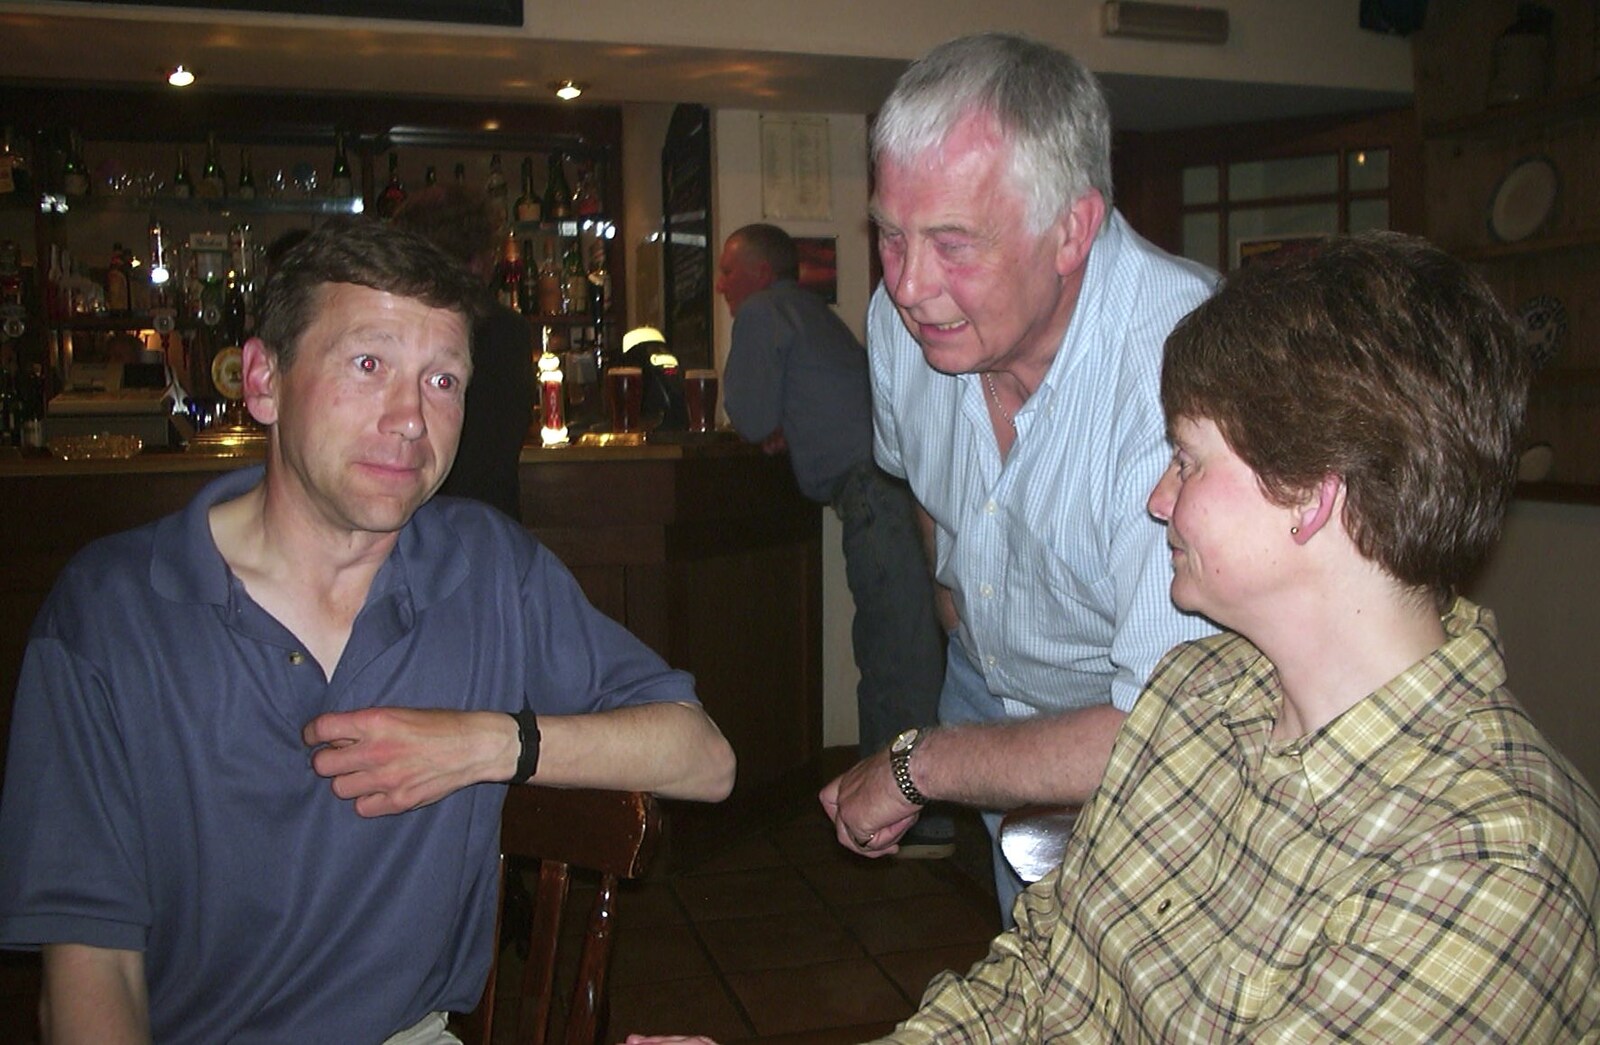 The BSCC Bike Ride, Shefford, Bedford - 11th May 2002: Colin leans in for a chat